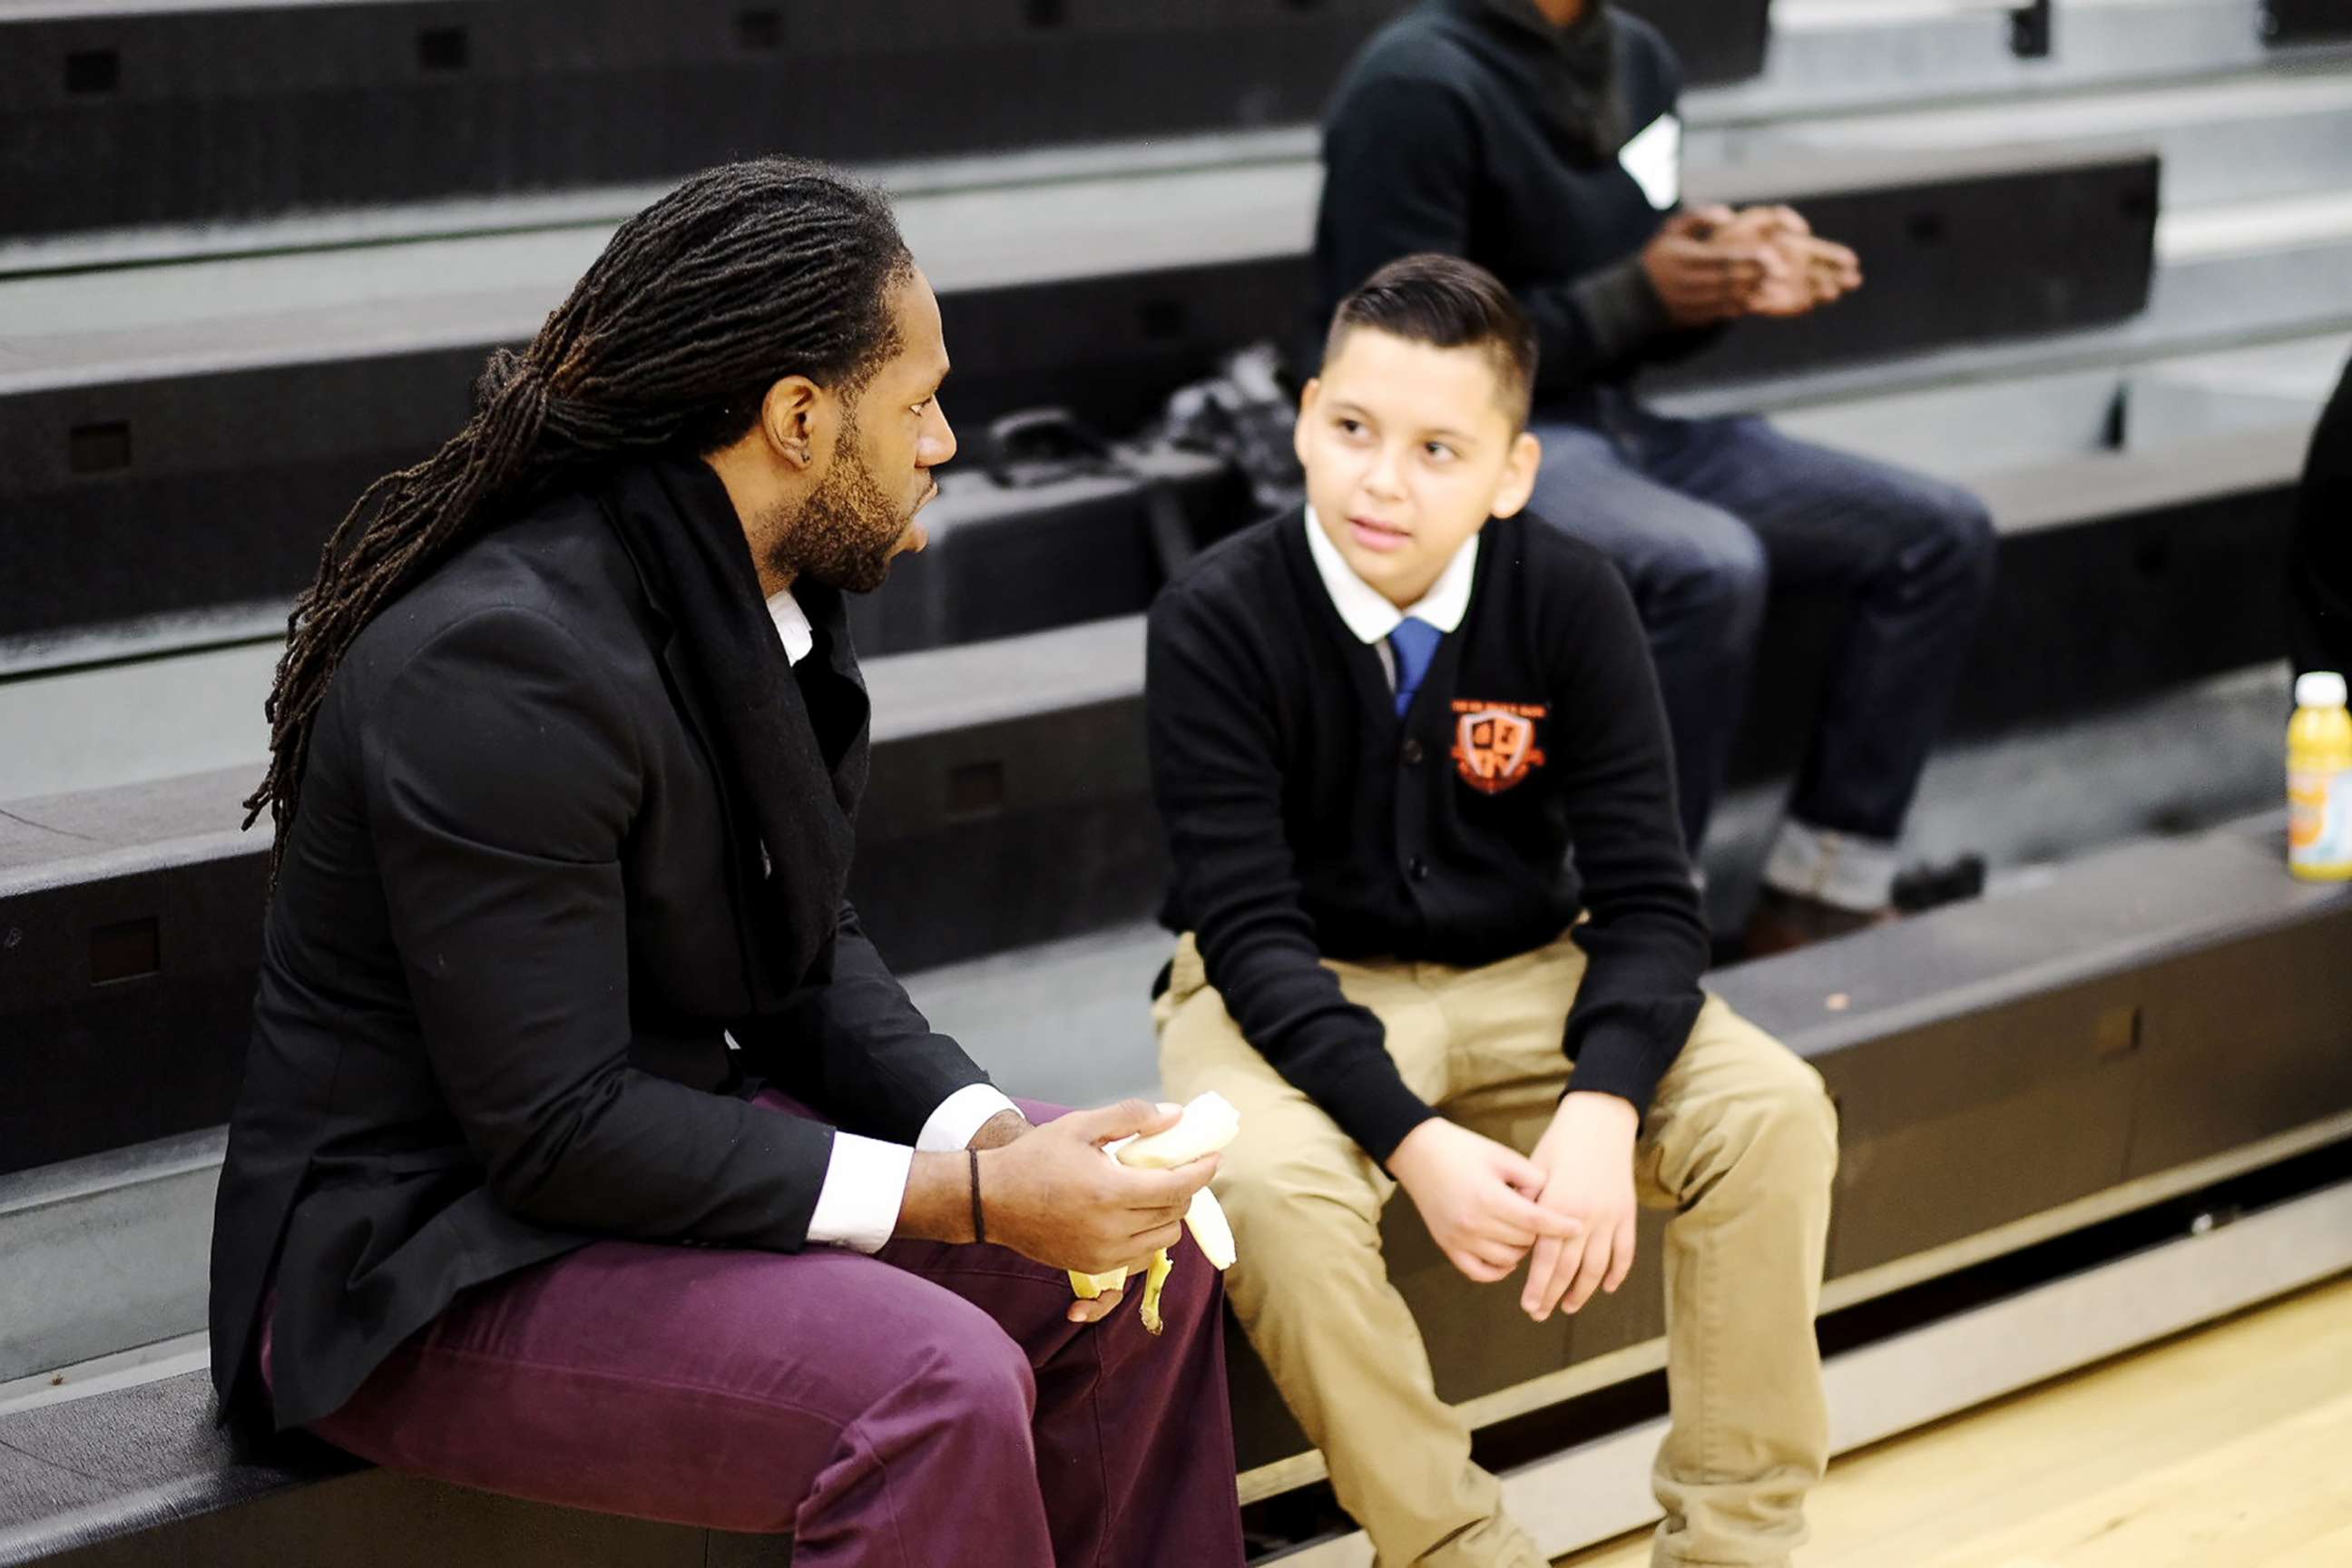 PHOTO: A mentor and a student talk during Billy Earl Dade Middle School's "Breakfast with Dads" event on Dec. 14, 2017.
